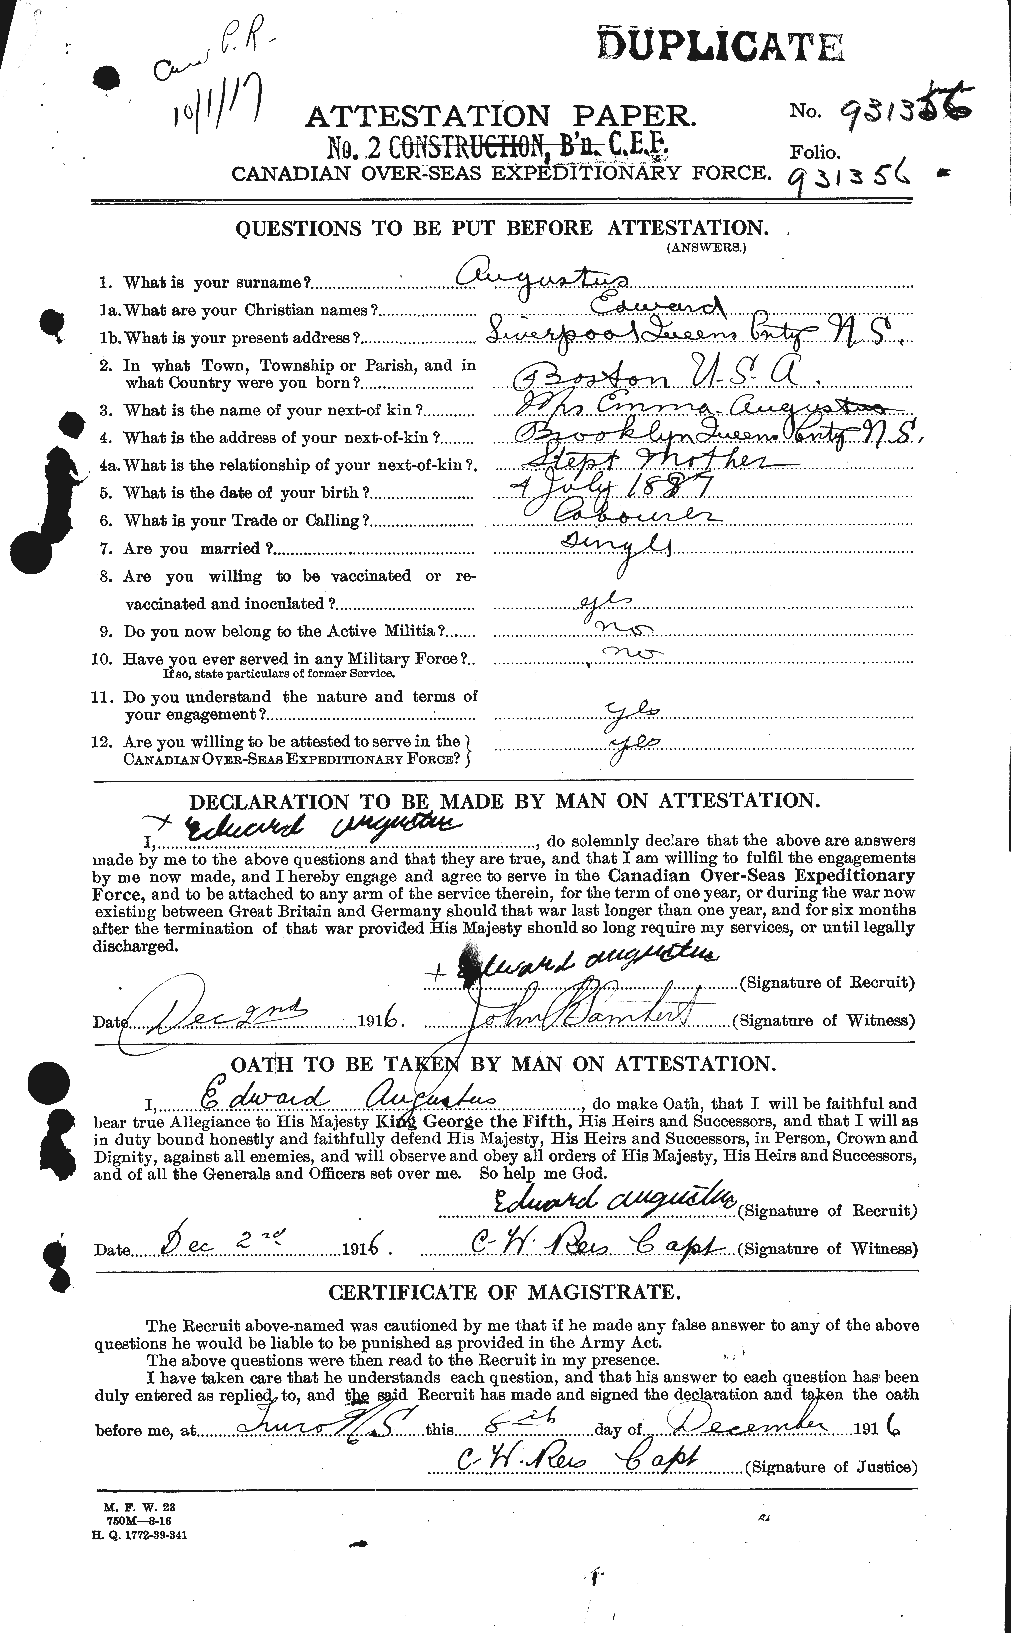 Personnel Records of the First World War - CEF 224295a